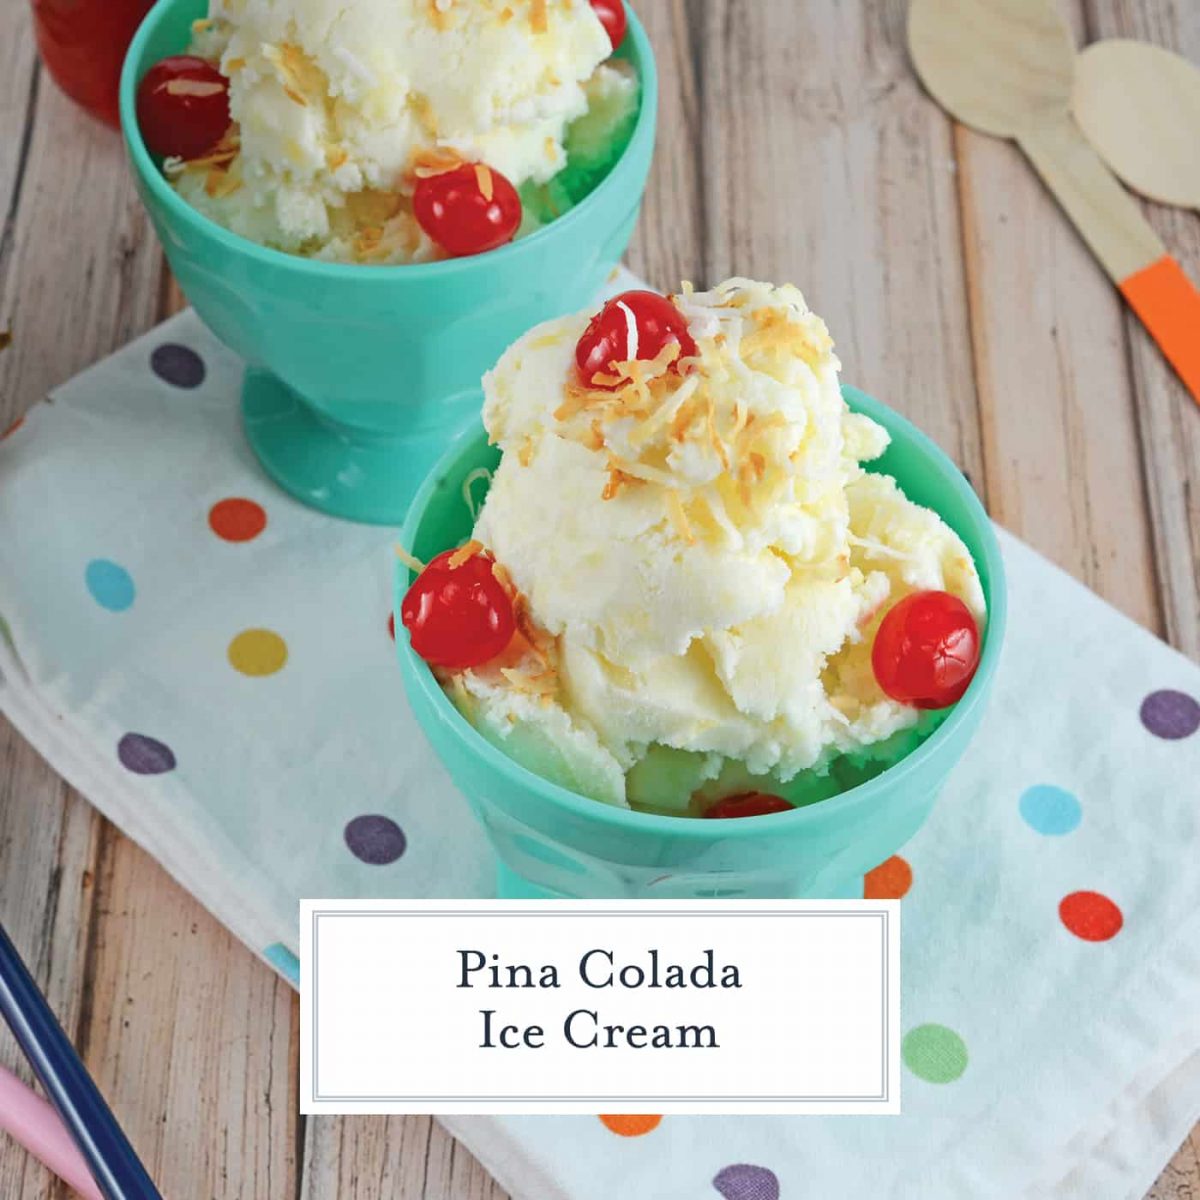 Make your favorite frozen drink into tropical Piña Colada Ice Cream! Loads of coconut and pineapple will have you feeling like you are on vacation. #icecreamrecipes #pinacoladaicecream #icecreammakerrecipe www.savoryexperiments.com